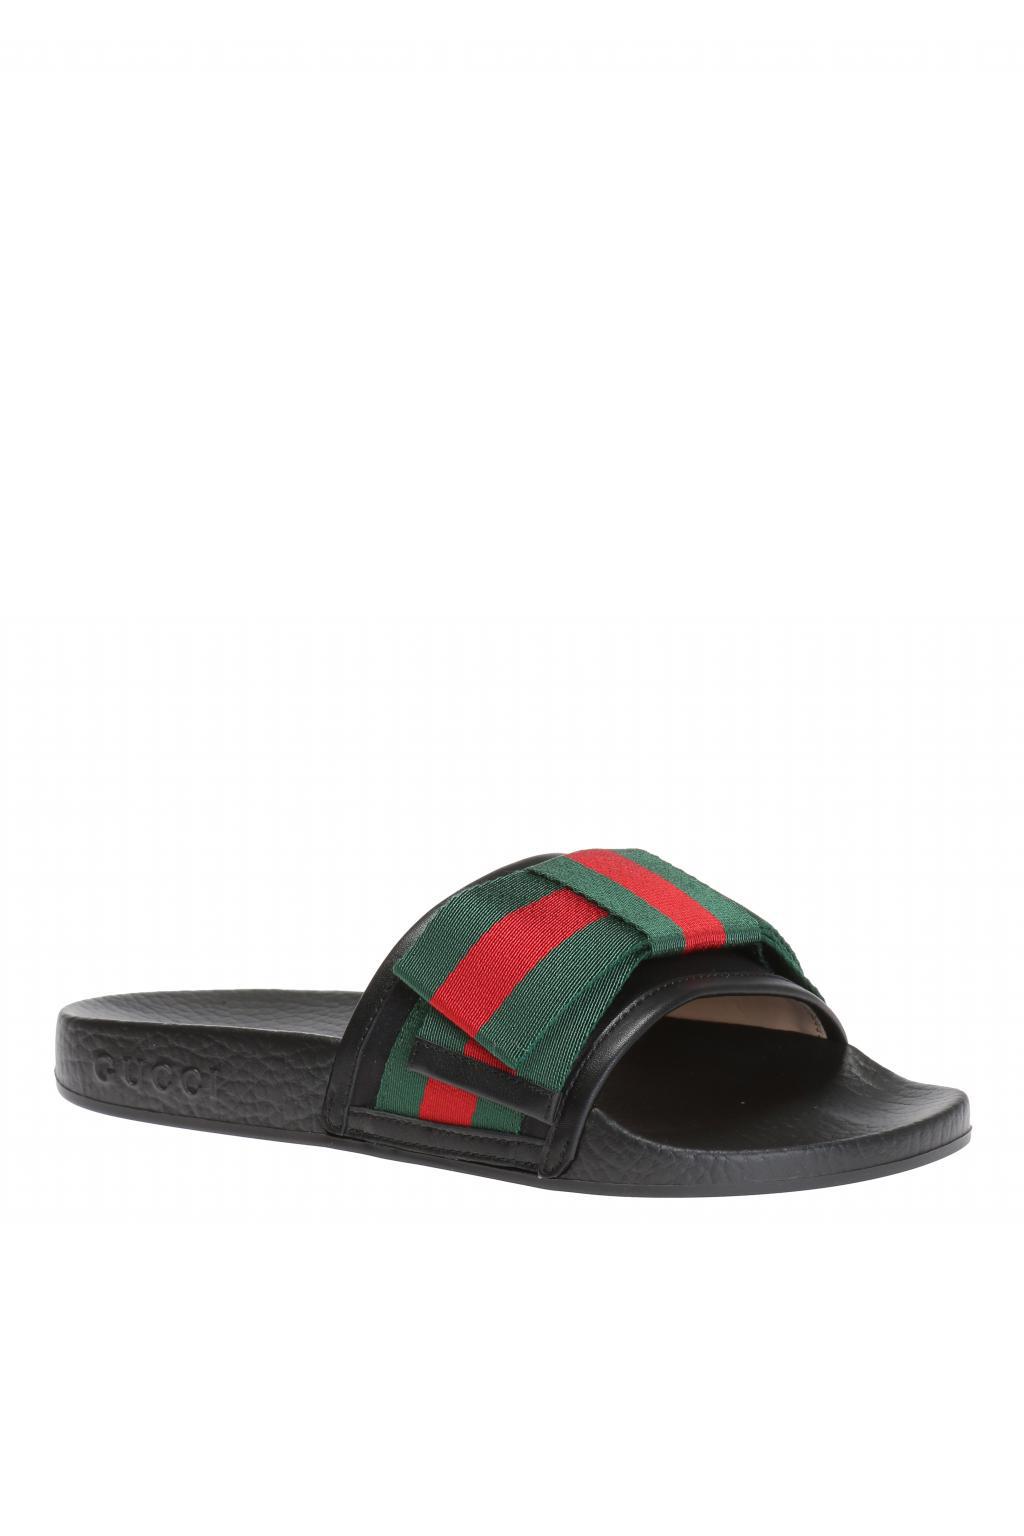 gucci sliders bow